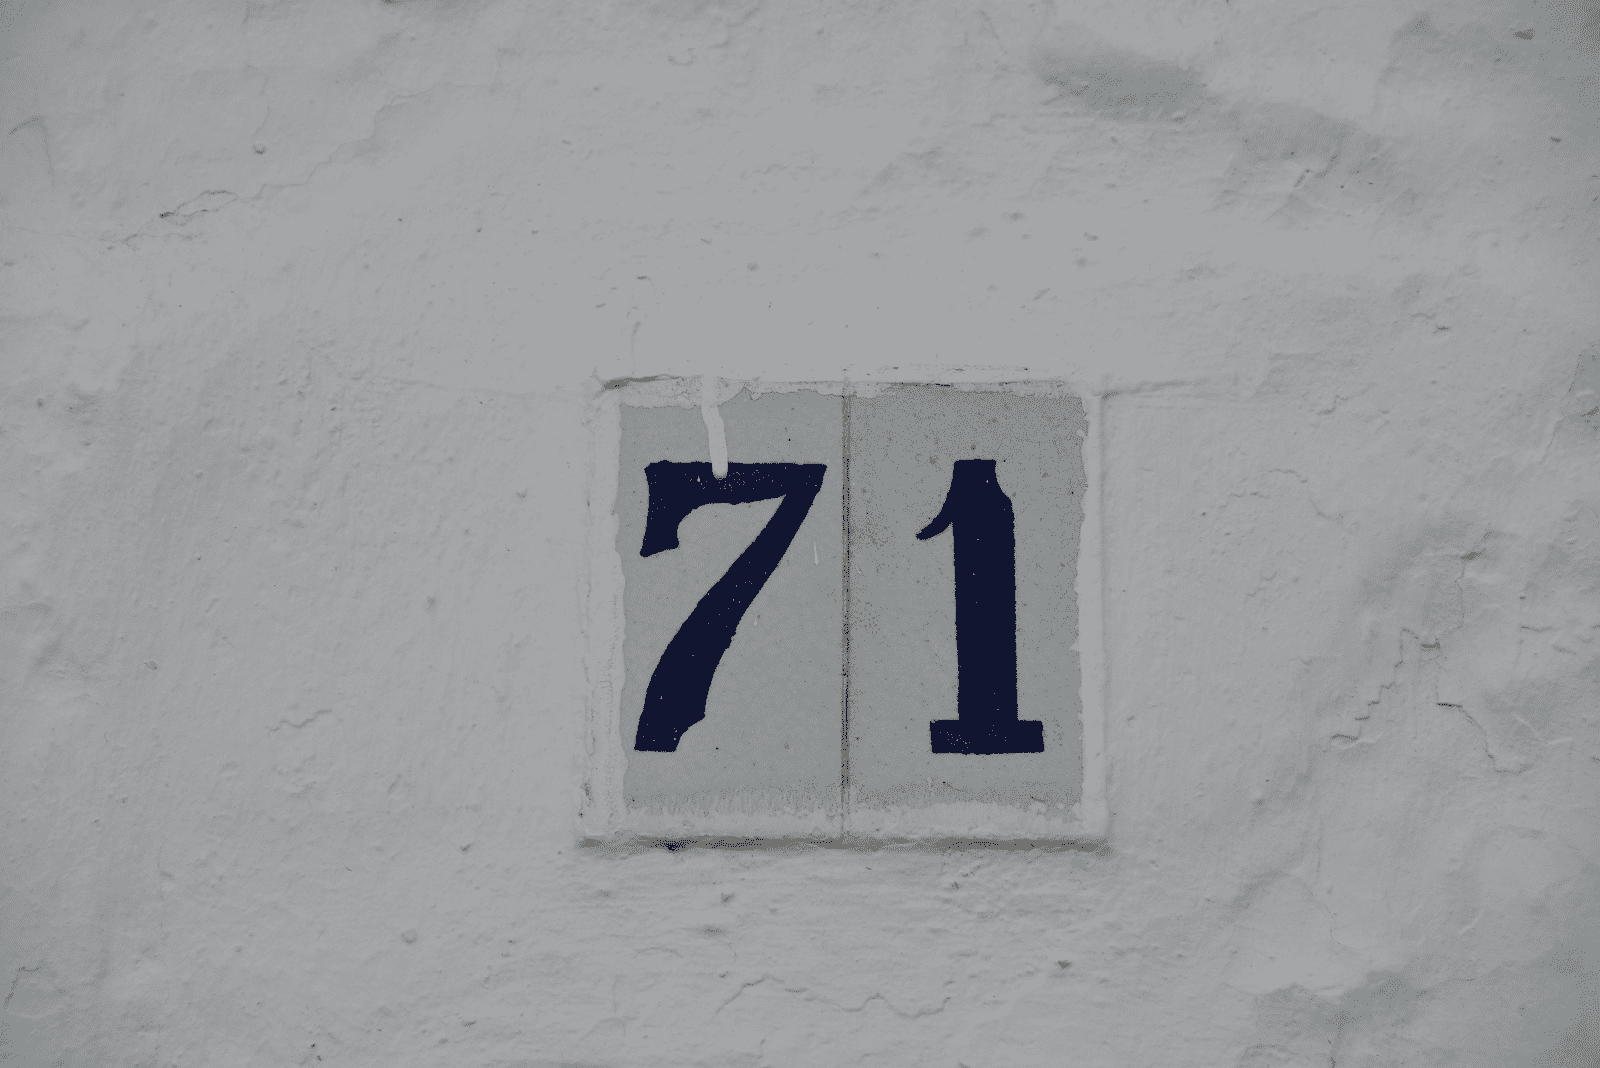 number 71 on the wall of the house